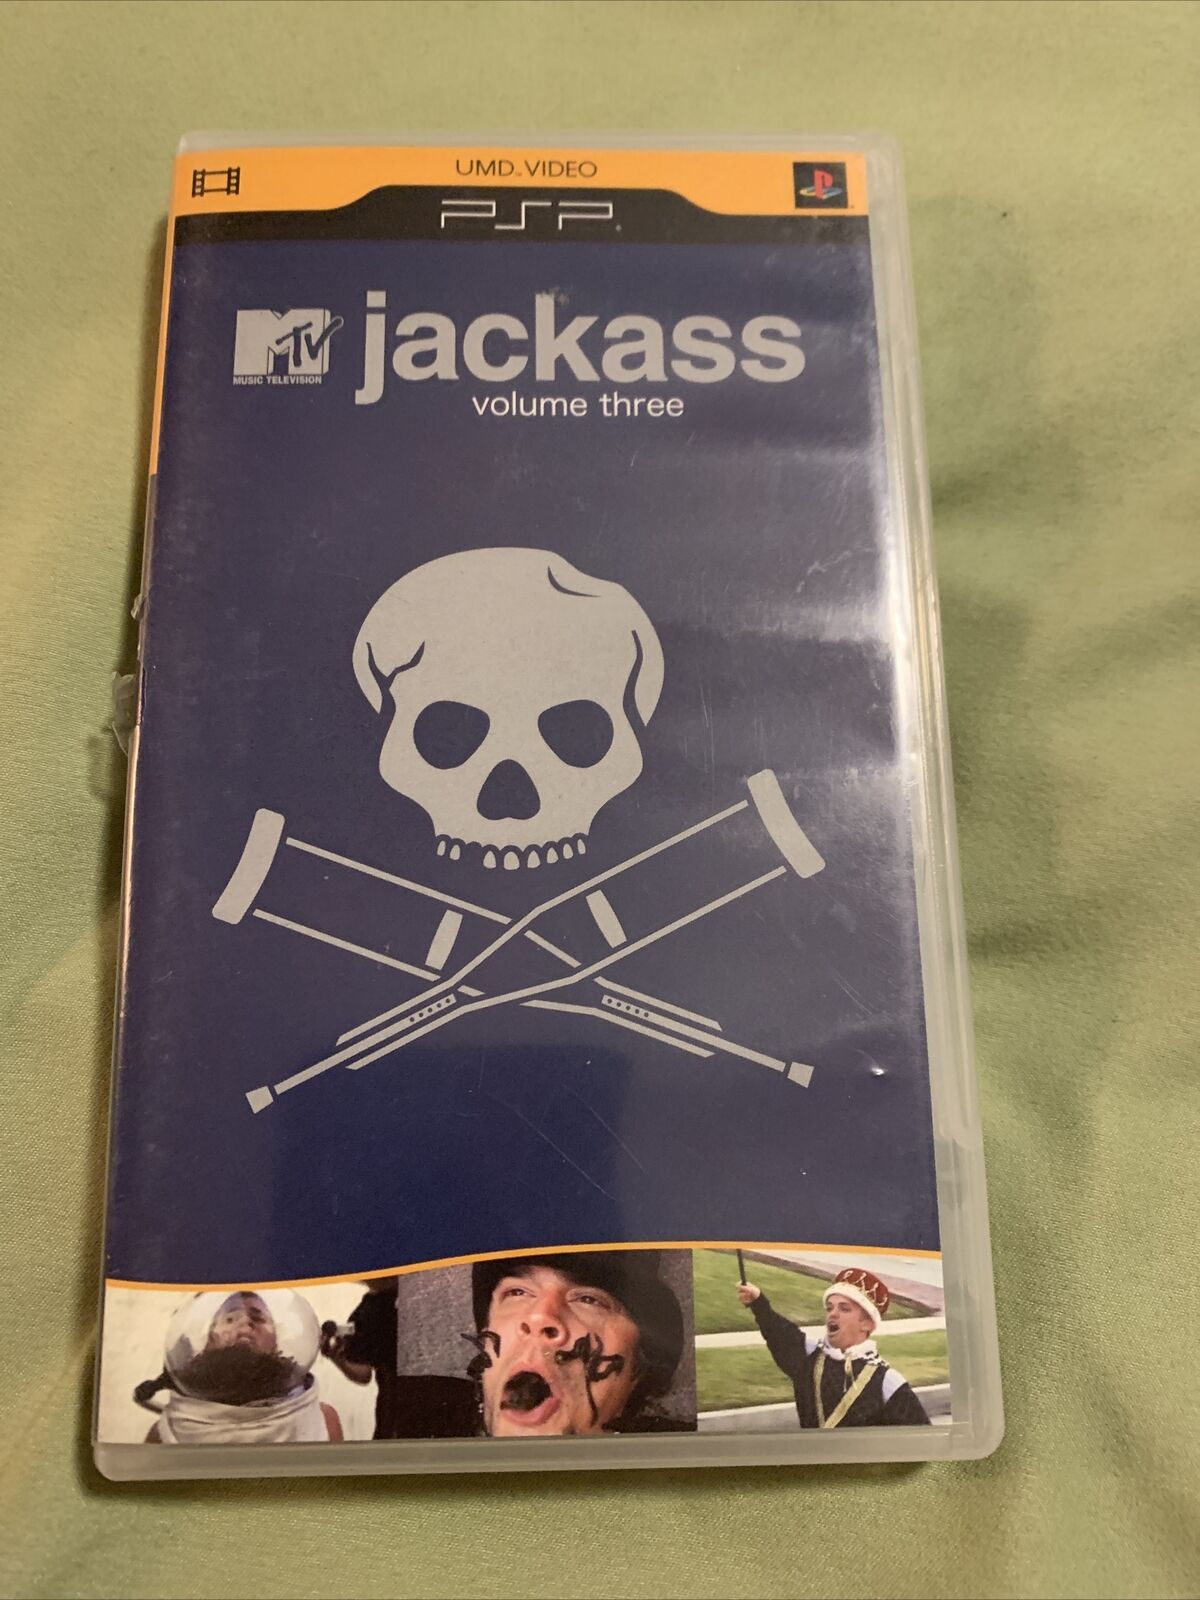 PSP Cheap bargain PlayStation Portable Movie UMD 3 Awesome Vol Detroit Mall Jackass